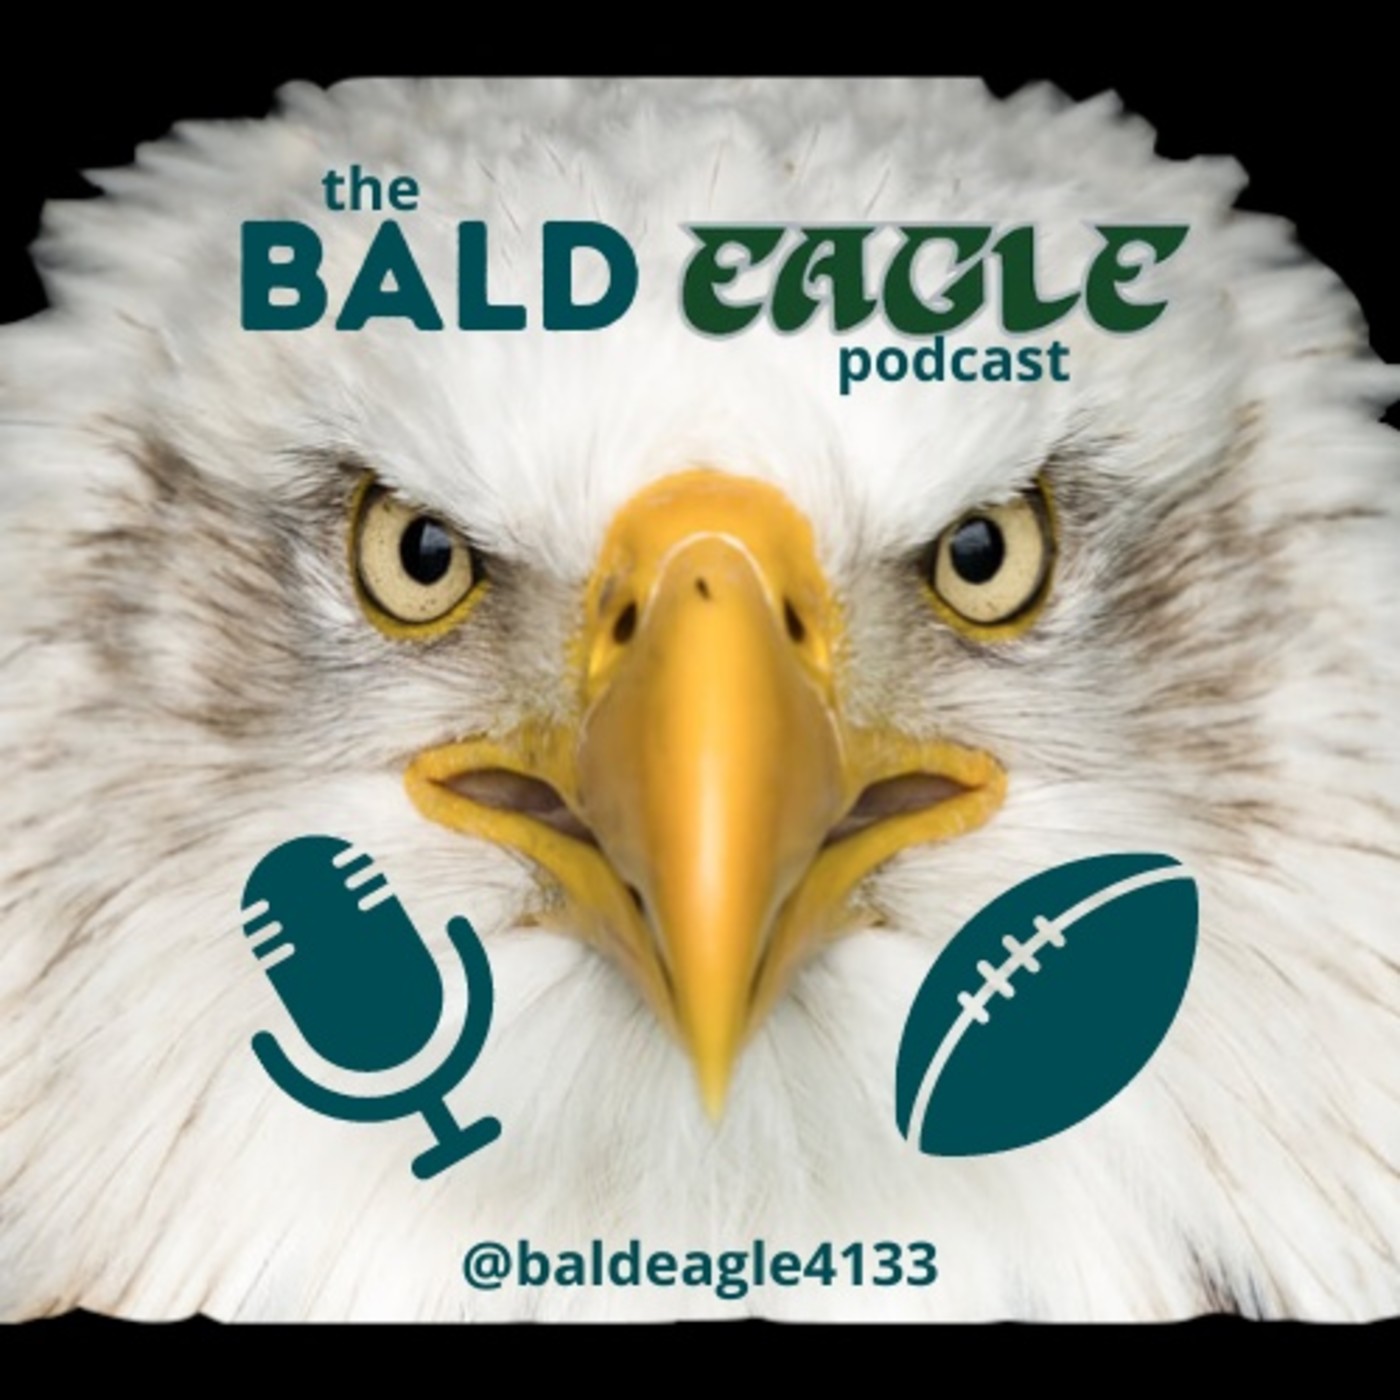 The Bald Eagle Podcast - Ep 83 - Vs Dallas Recap. Only Undefeated Team Remaining!